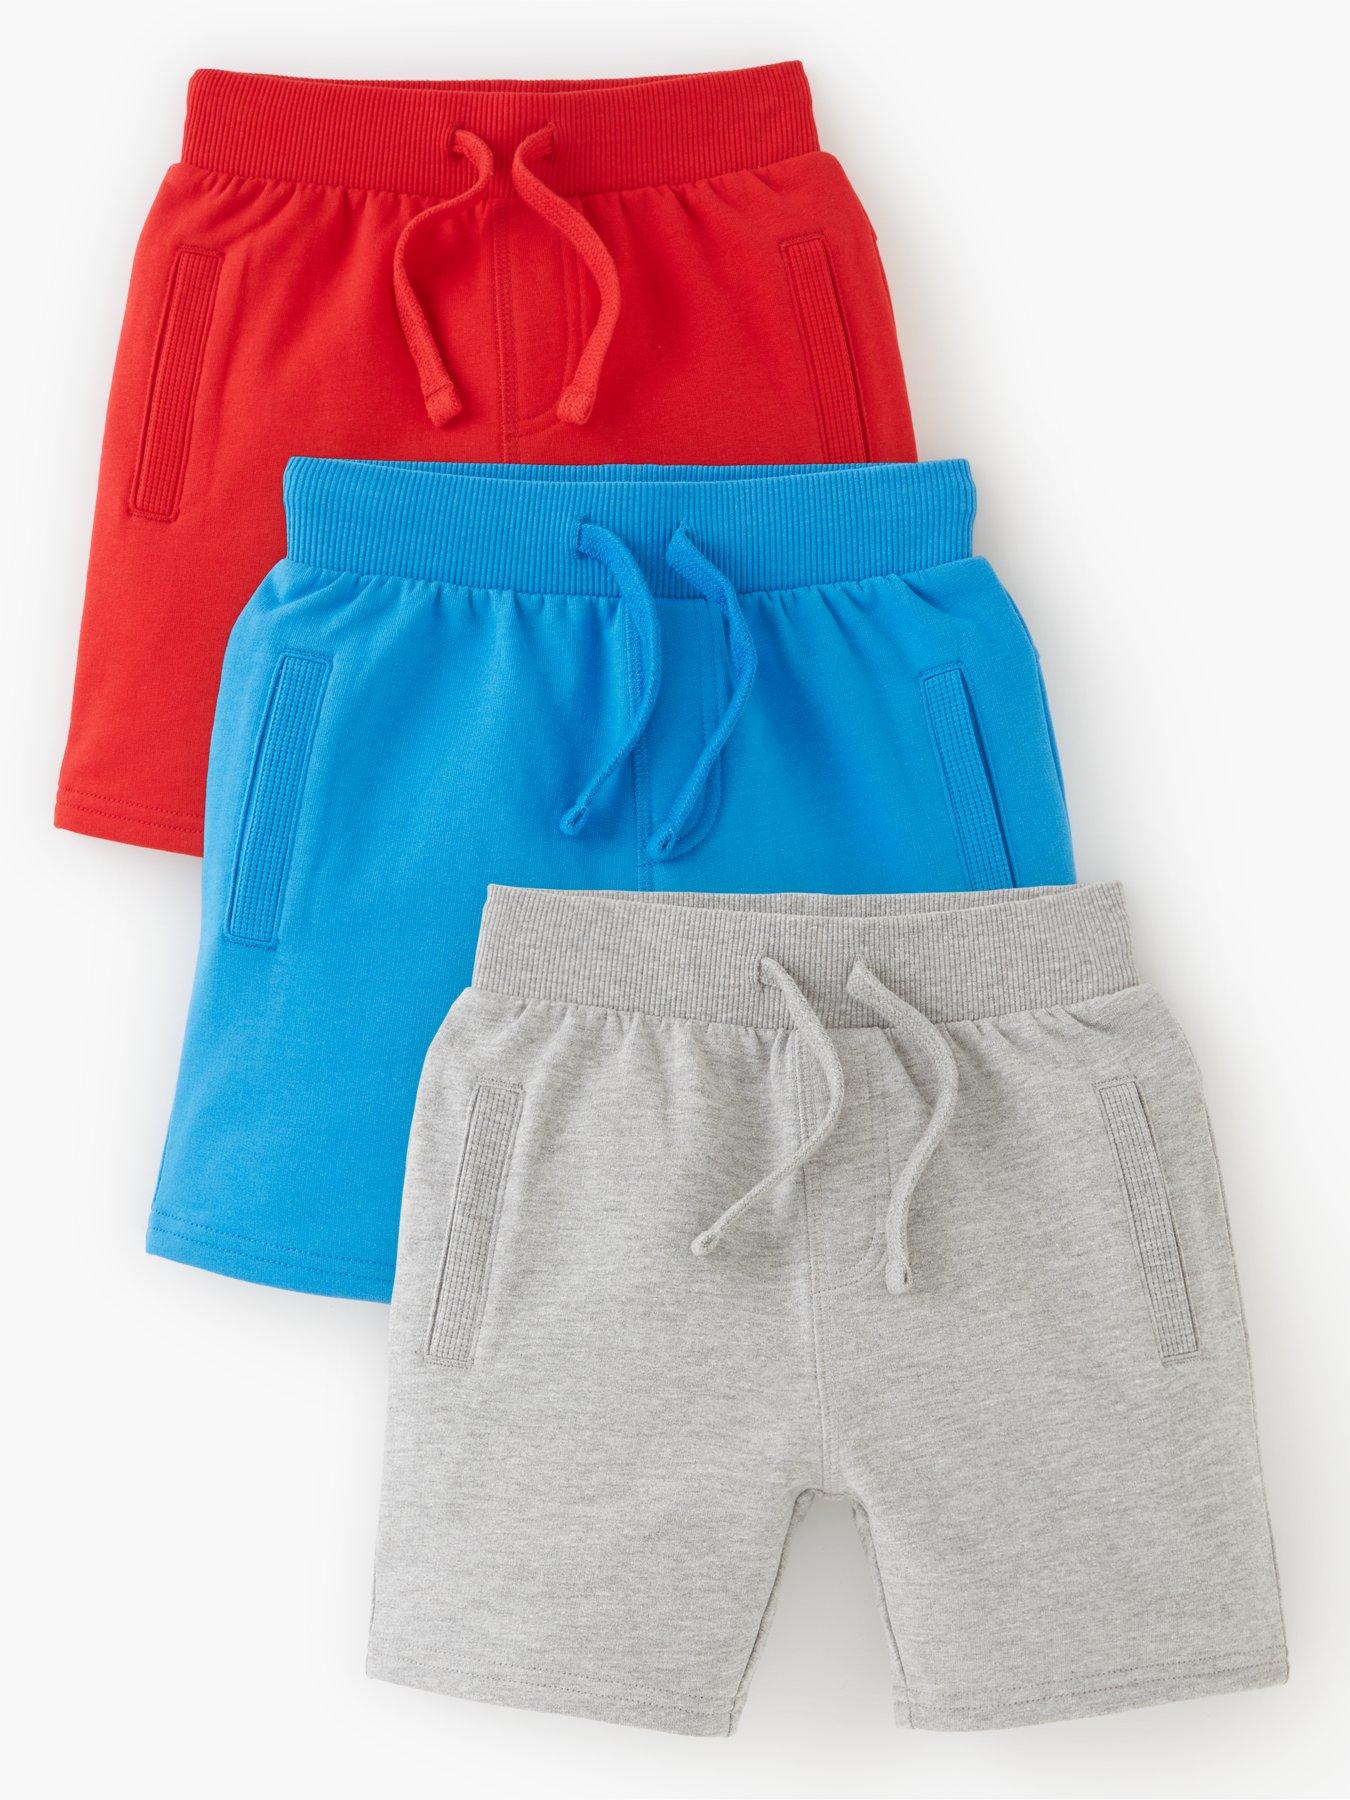 Everyday Boys Cotton Rich Essential Shorts (3 Pack) - Multi